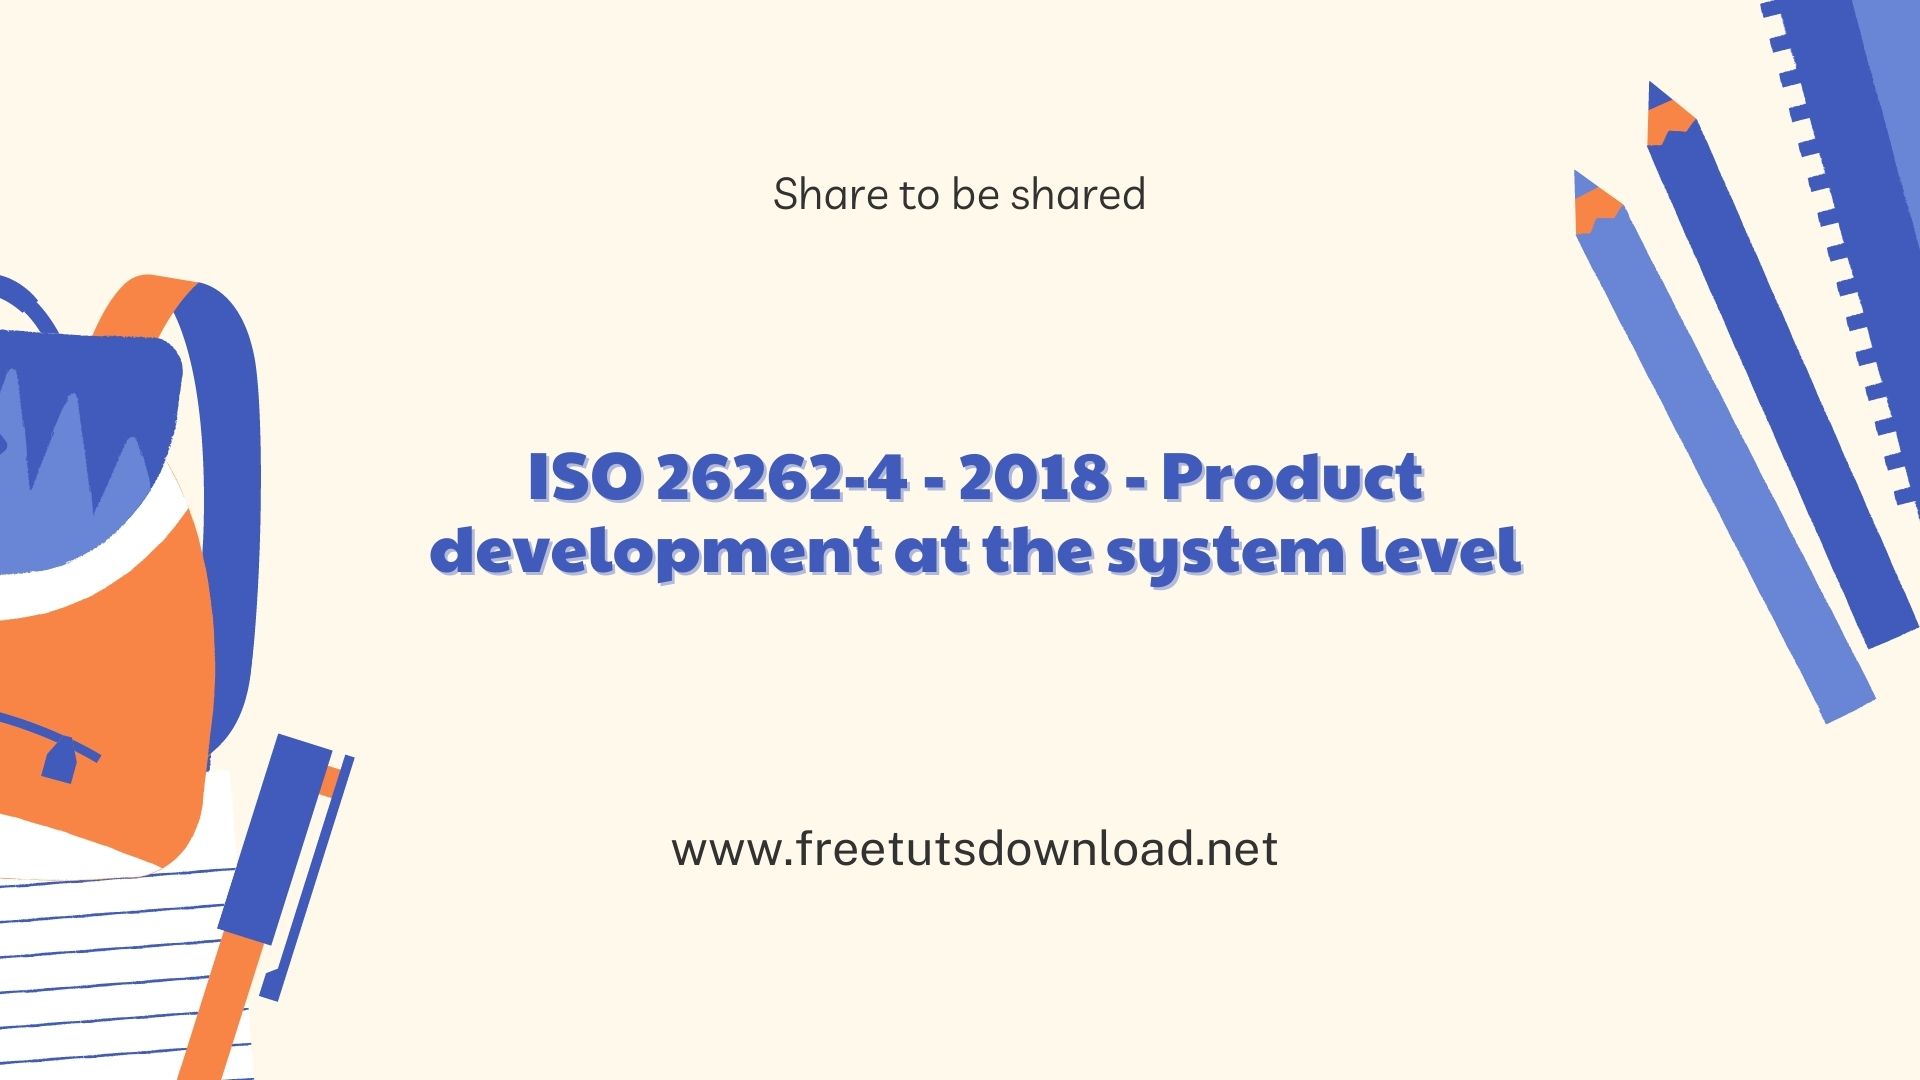 ISO 26262-4 - 2018 - Product development at the system level